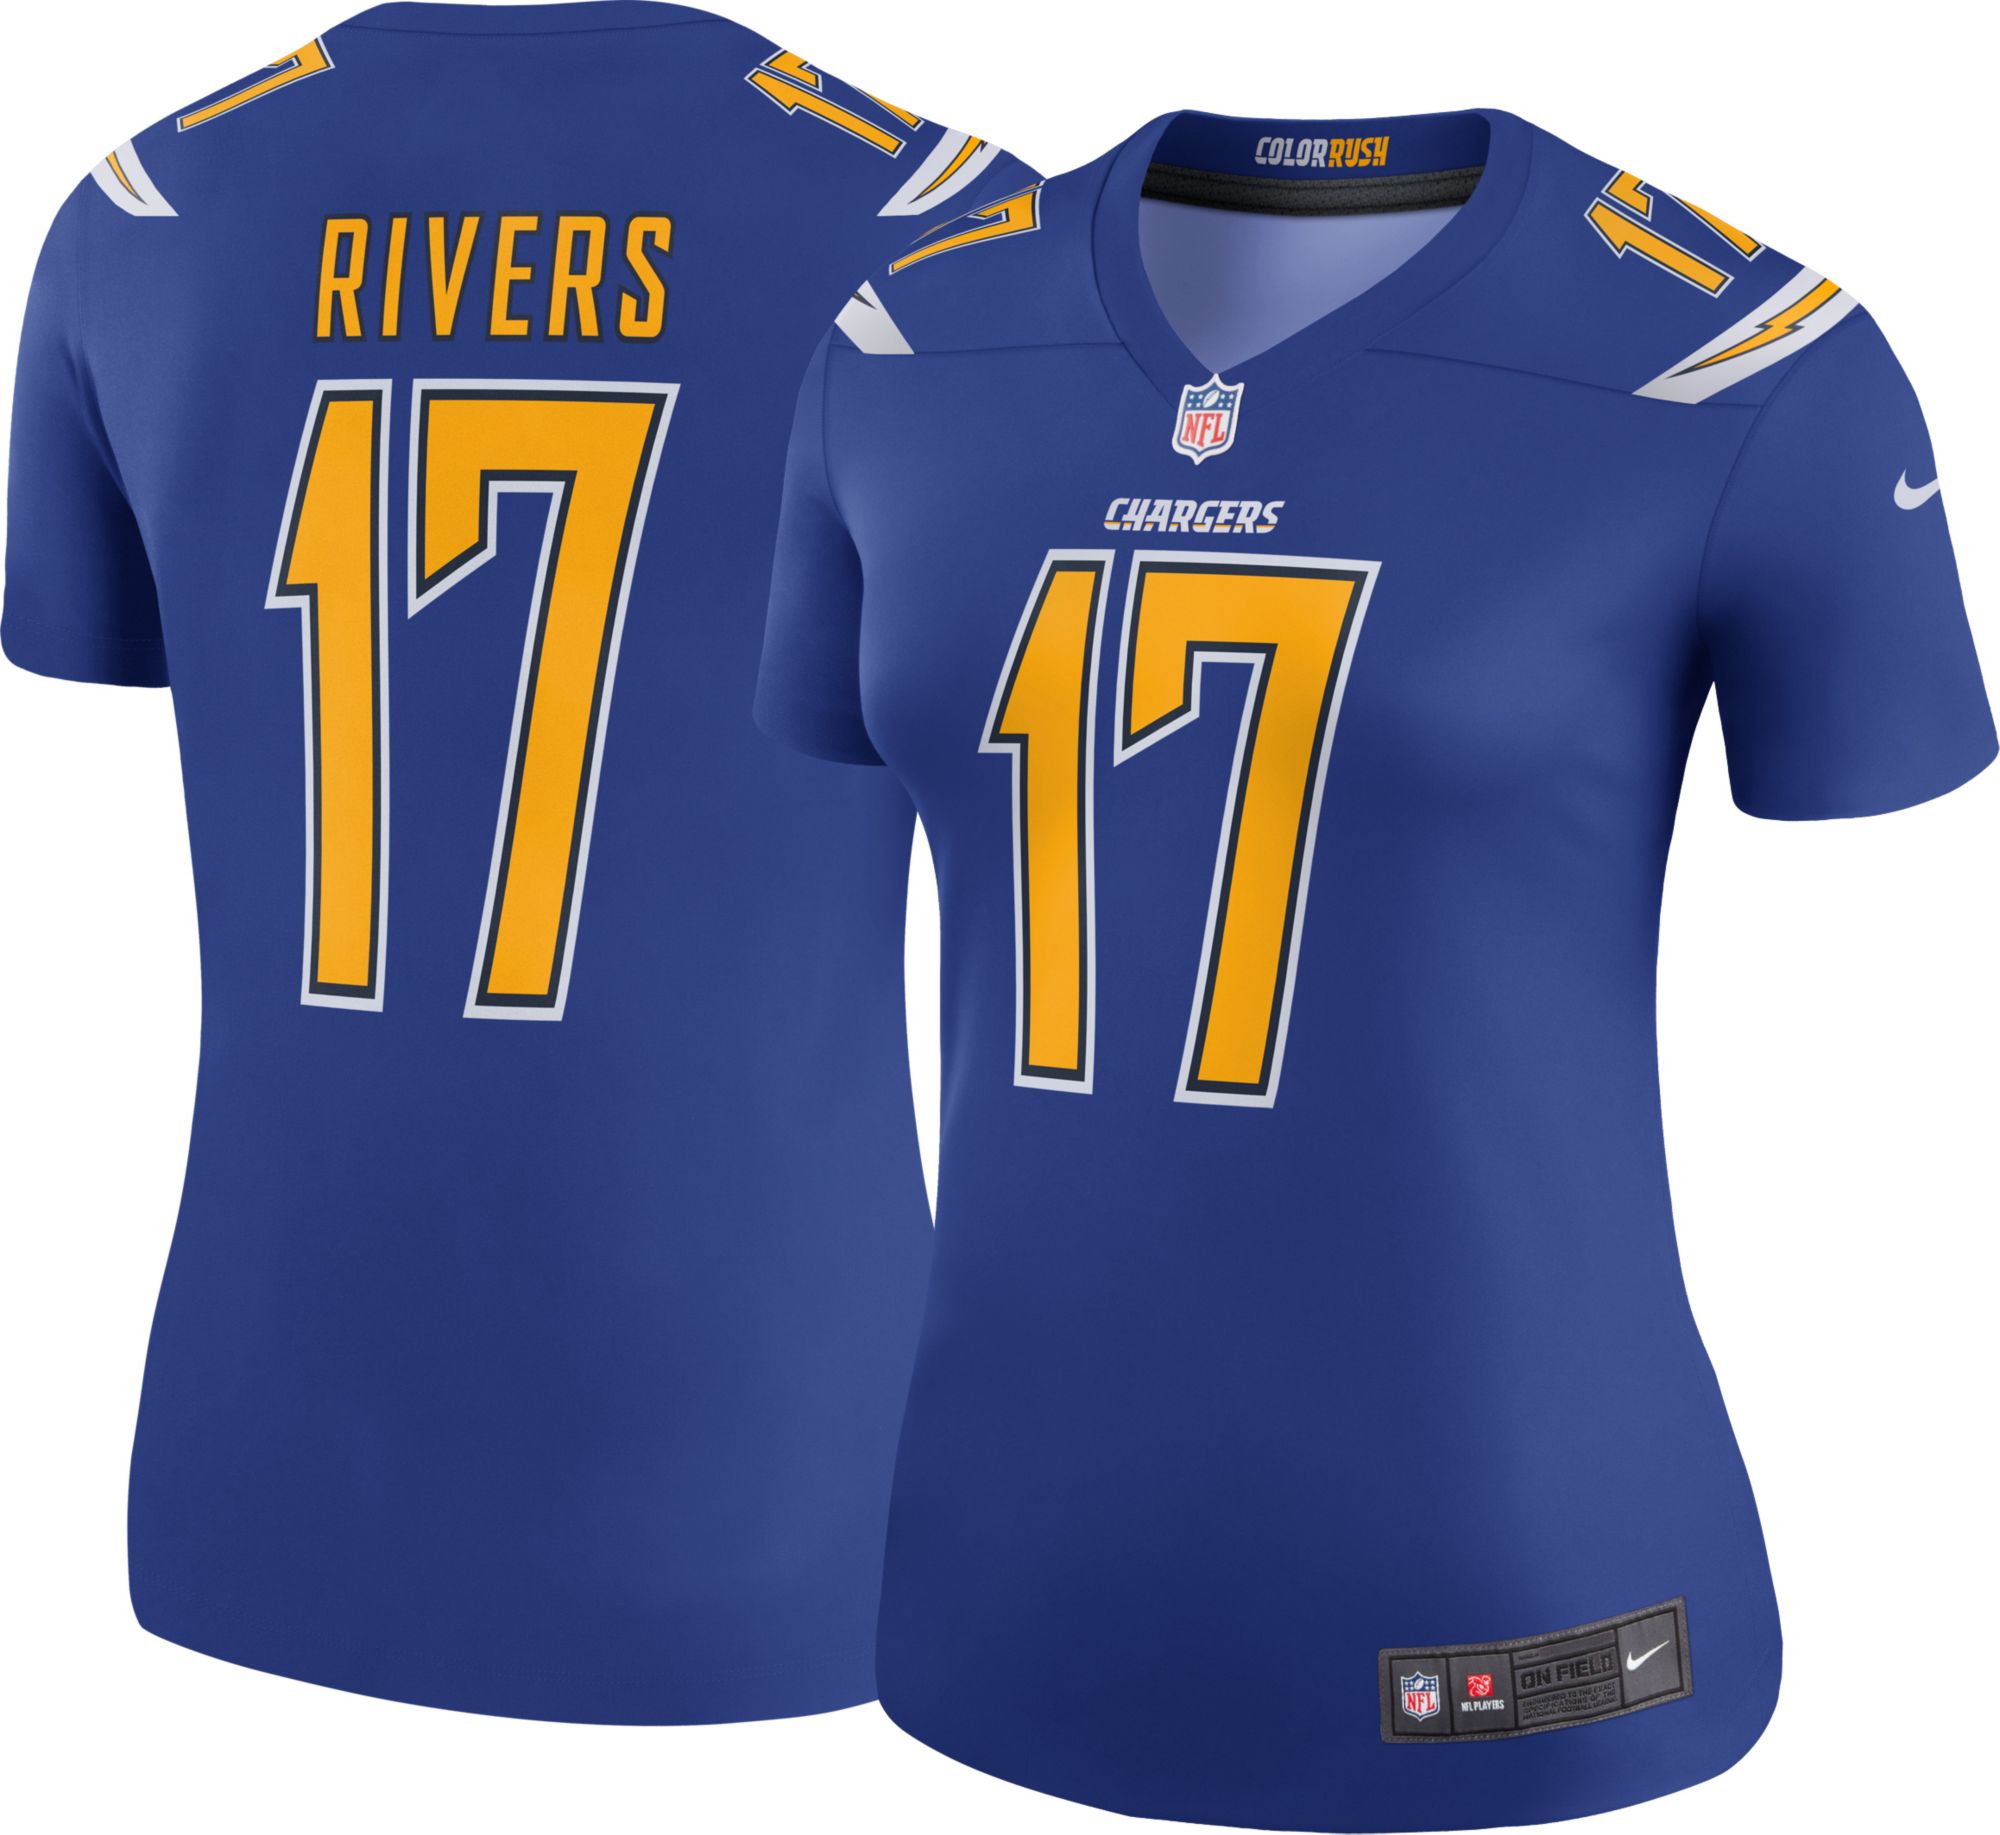 chargers color rush jersey sold out